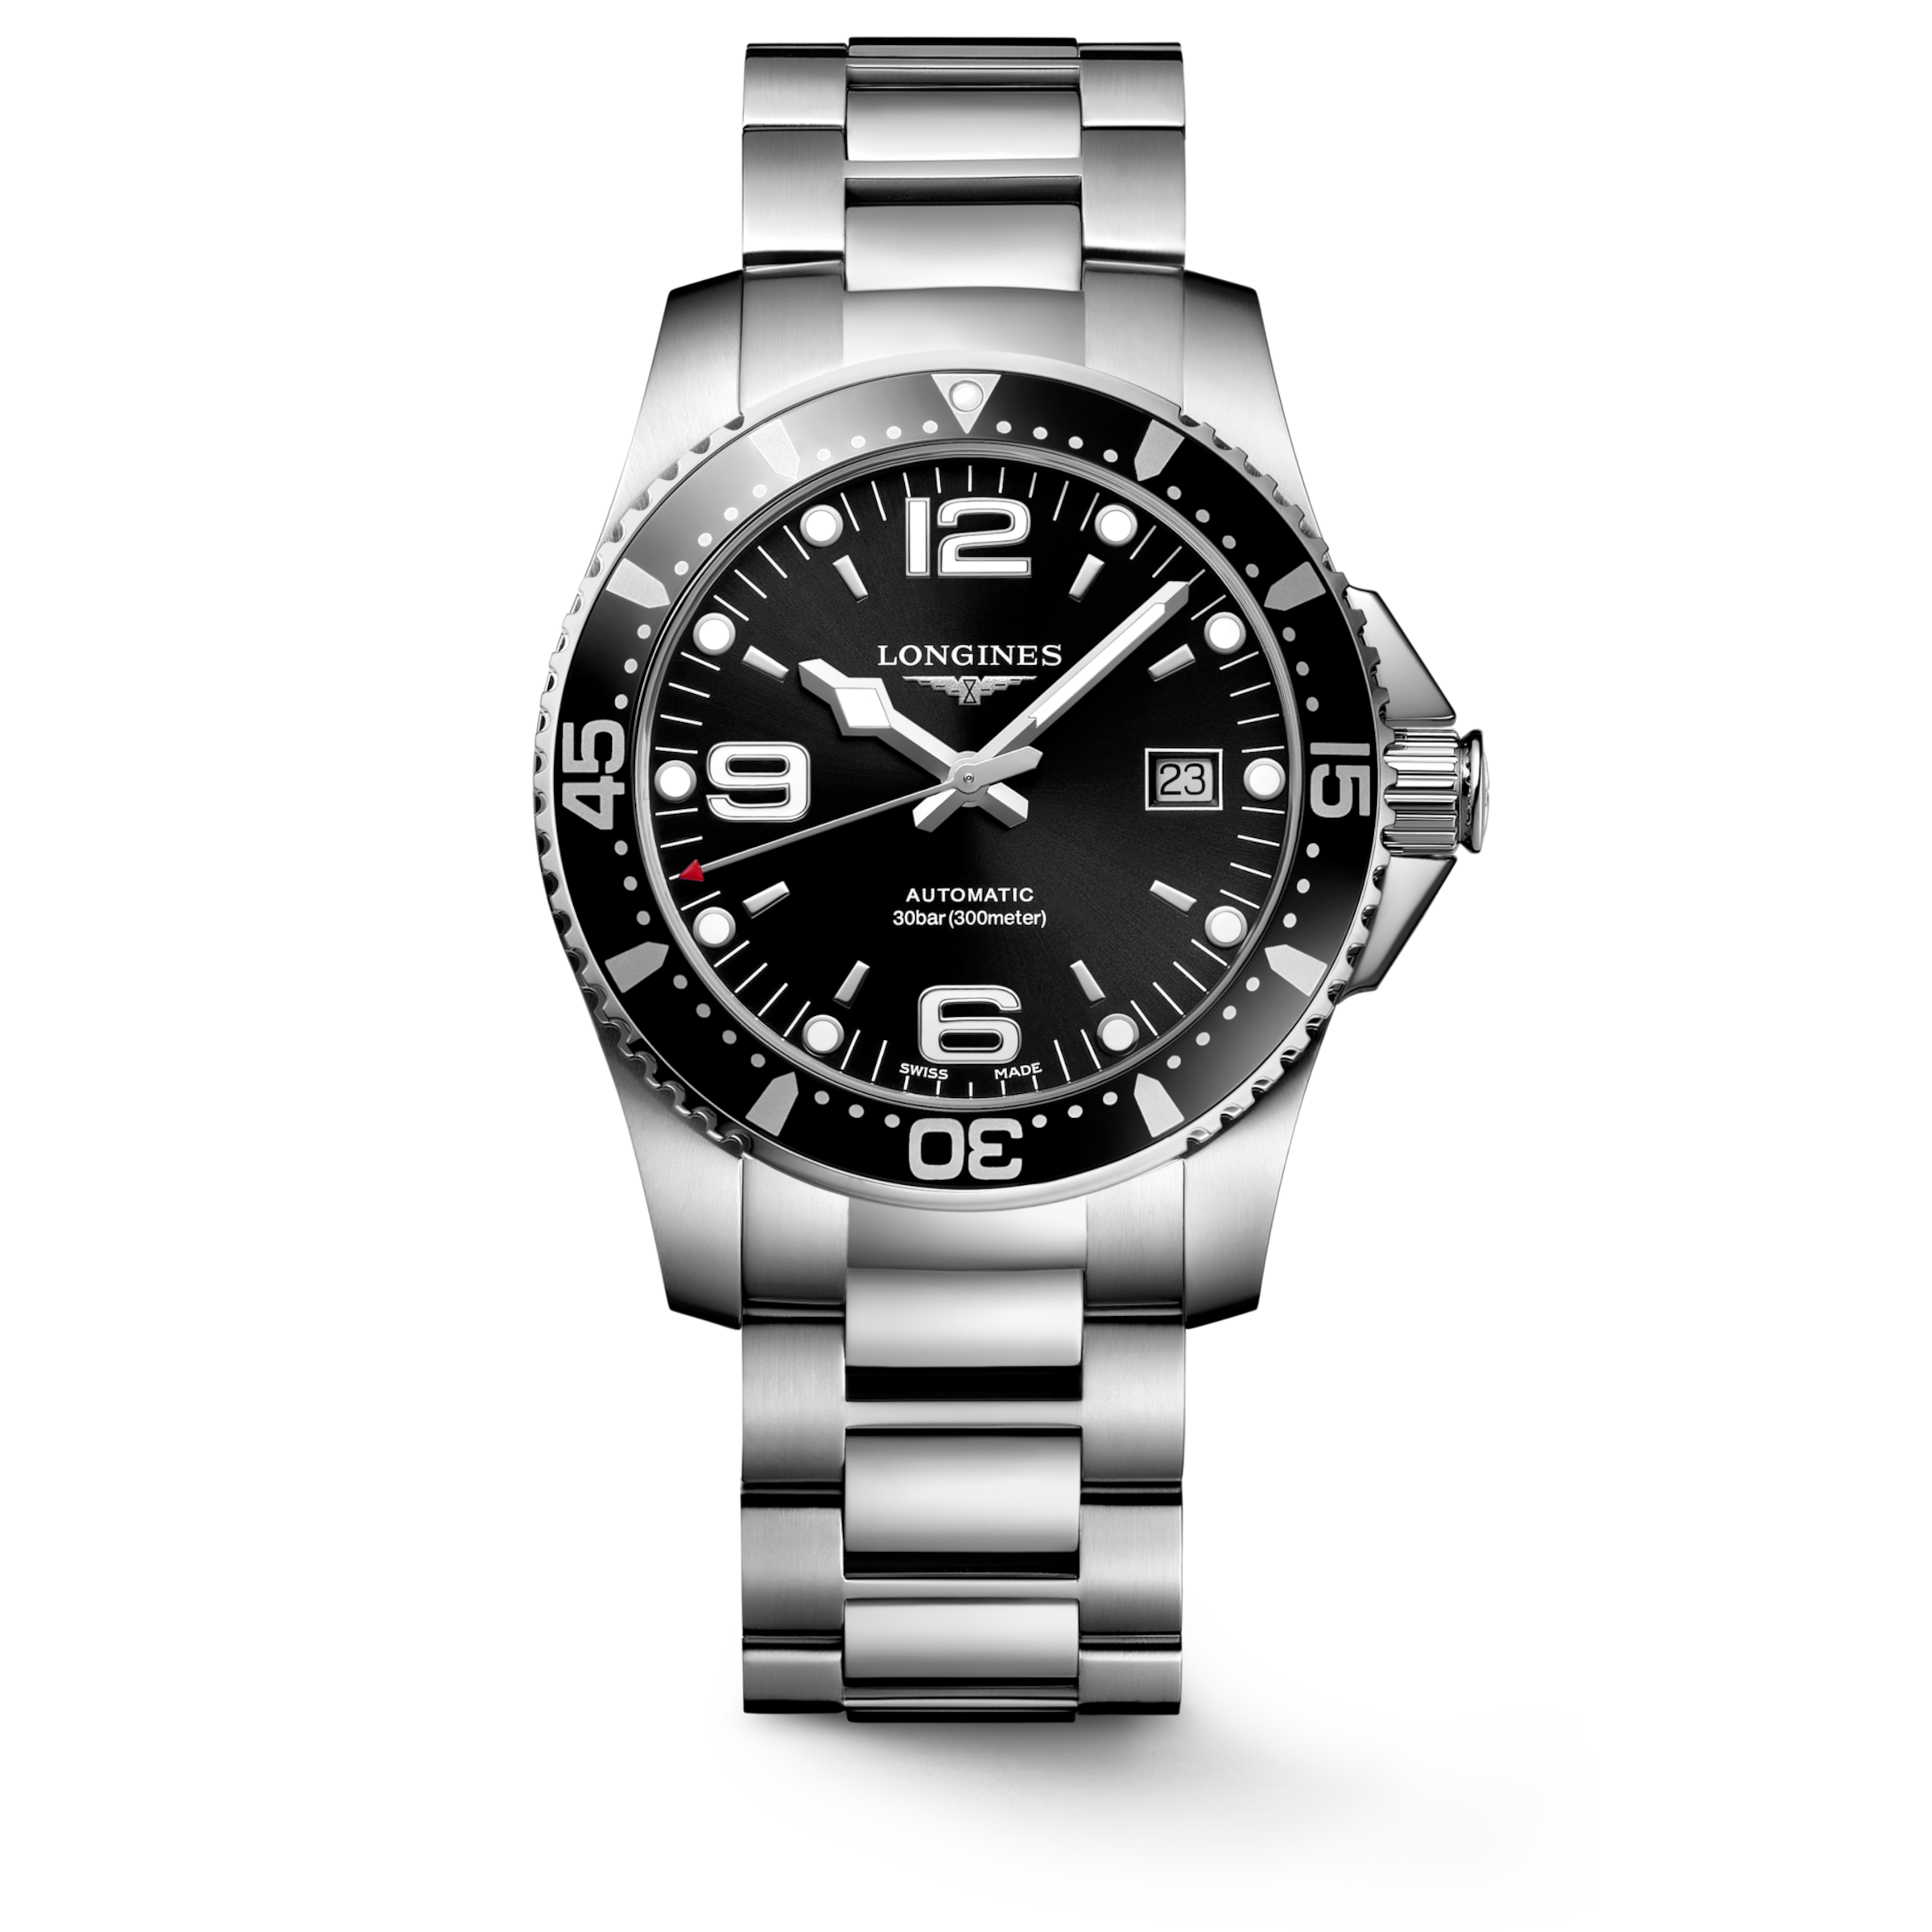 Longines HYDROCONQUEST Automatic Stainless steel Watch - L3.742.4.56.6